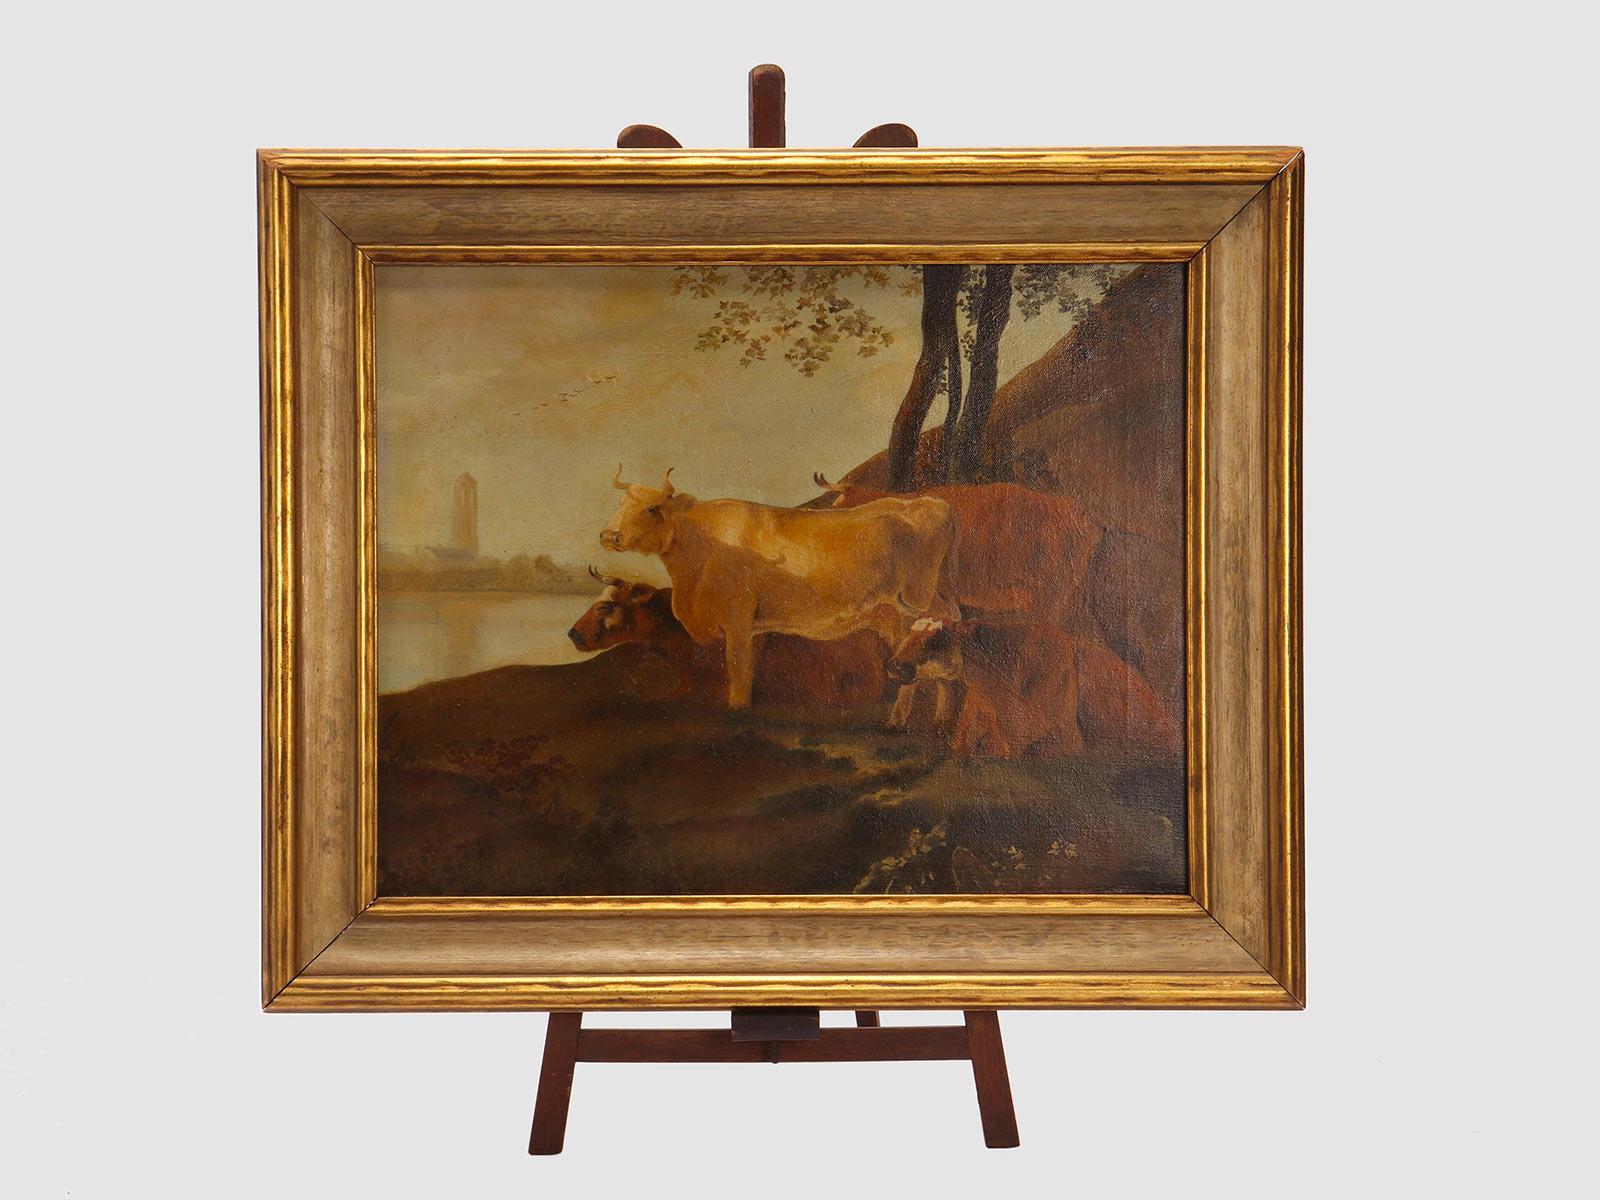 An Oil on canvas painting depicting a group of cows grazing wildly in a rural landscape. Giltwood frame. Austria circa 1880. 